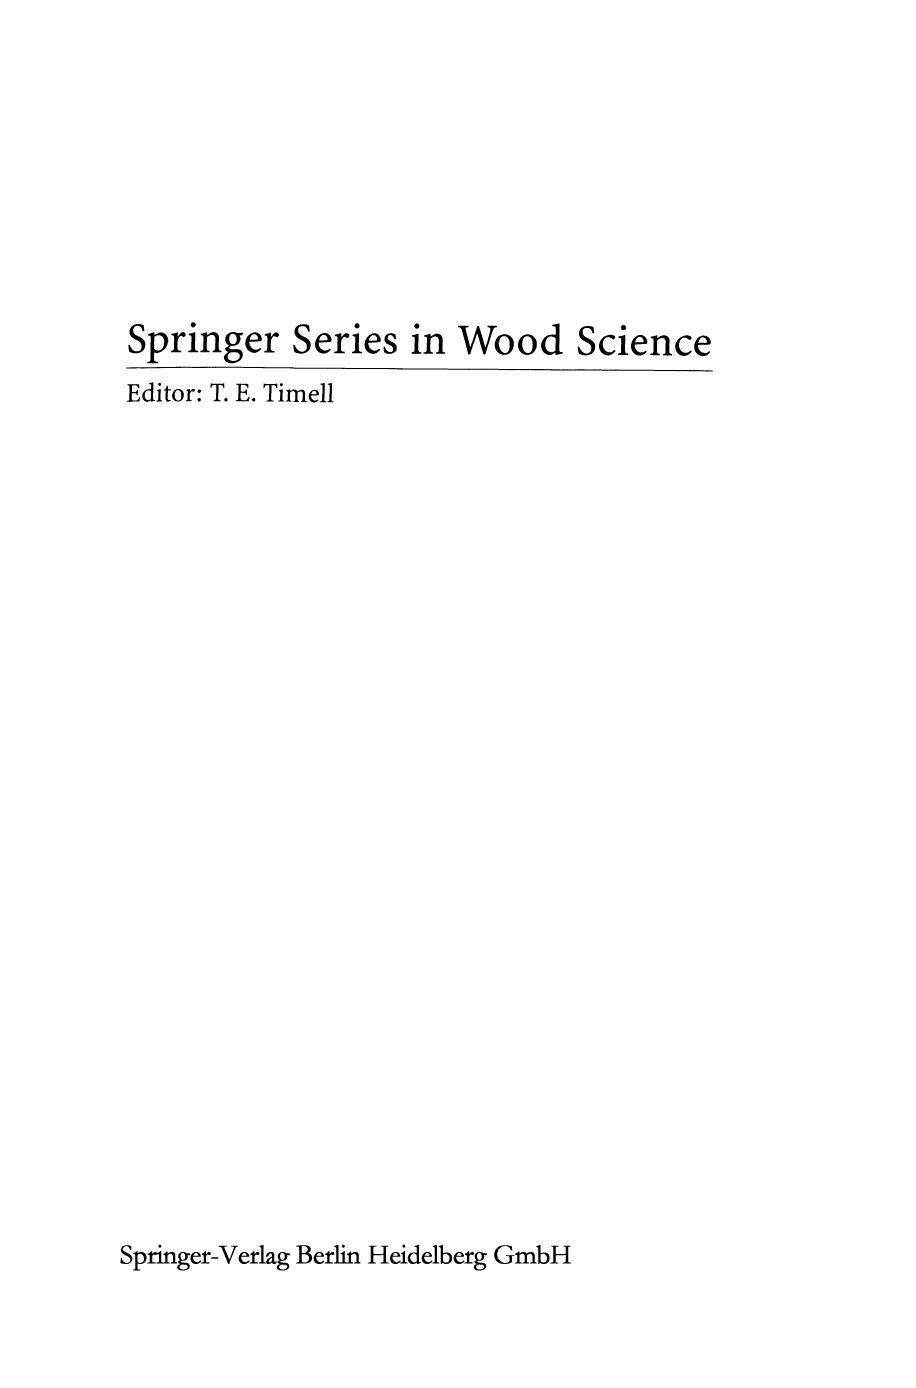 Analytical Methods in Wood Chemistry, Pulping, and Papermaking      1965